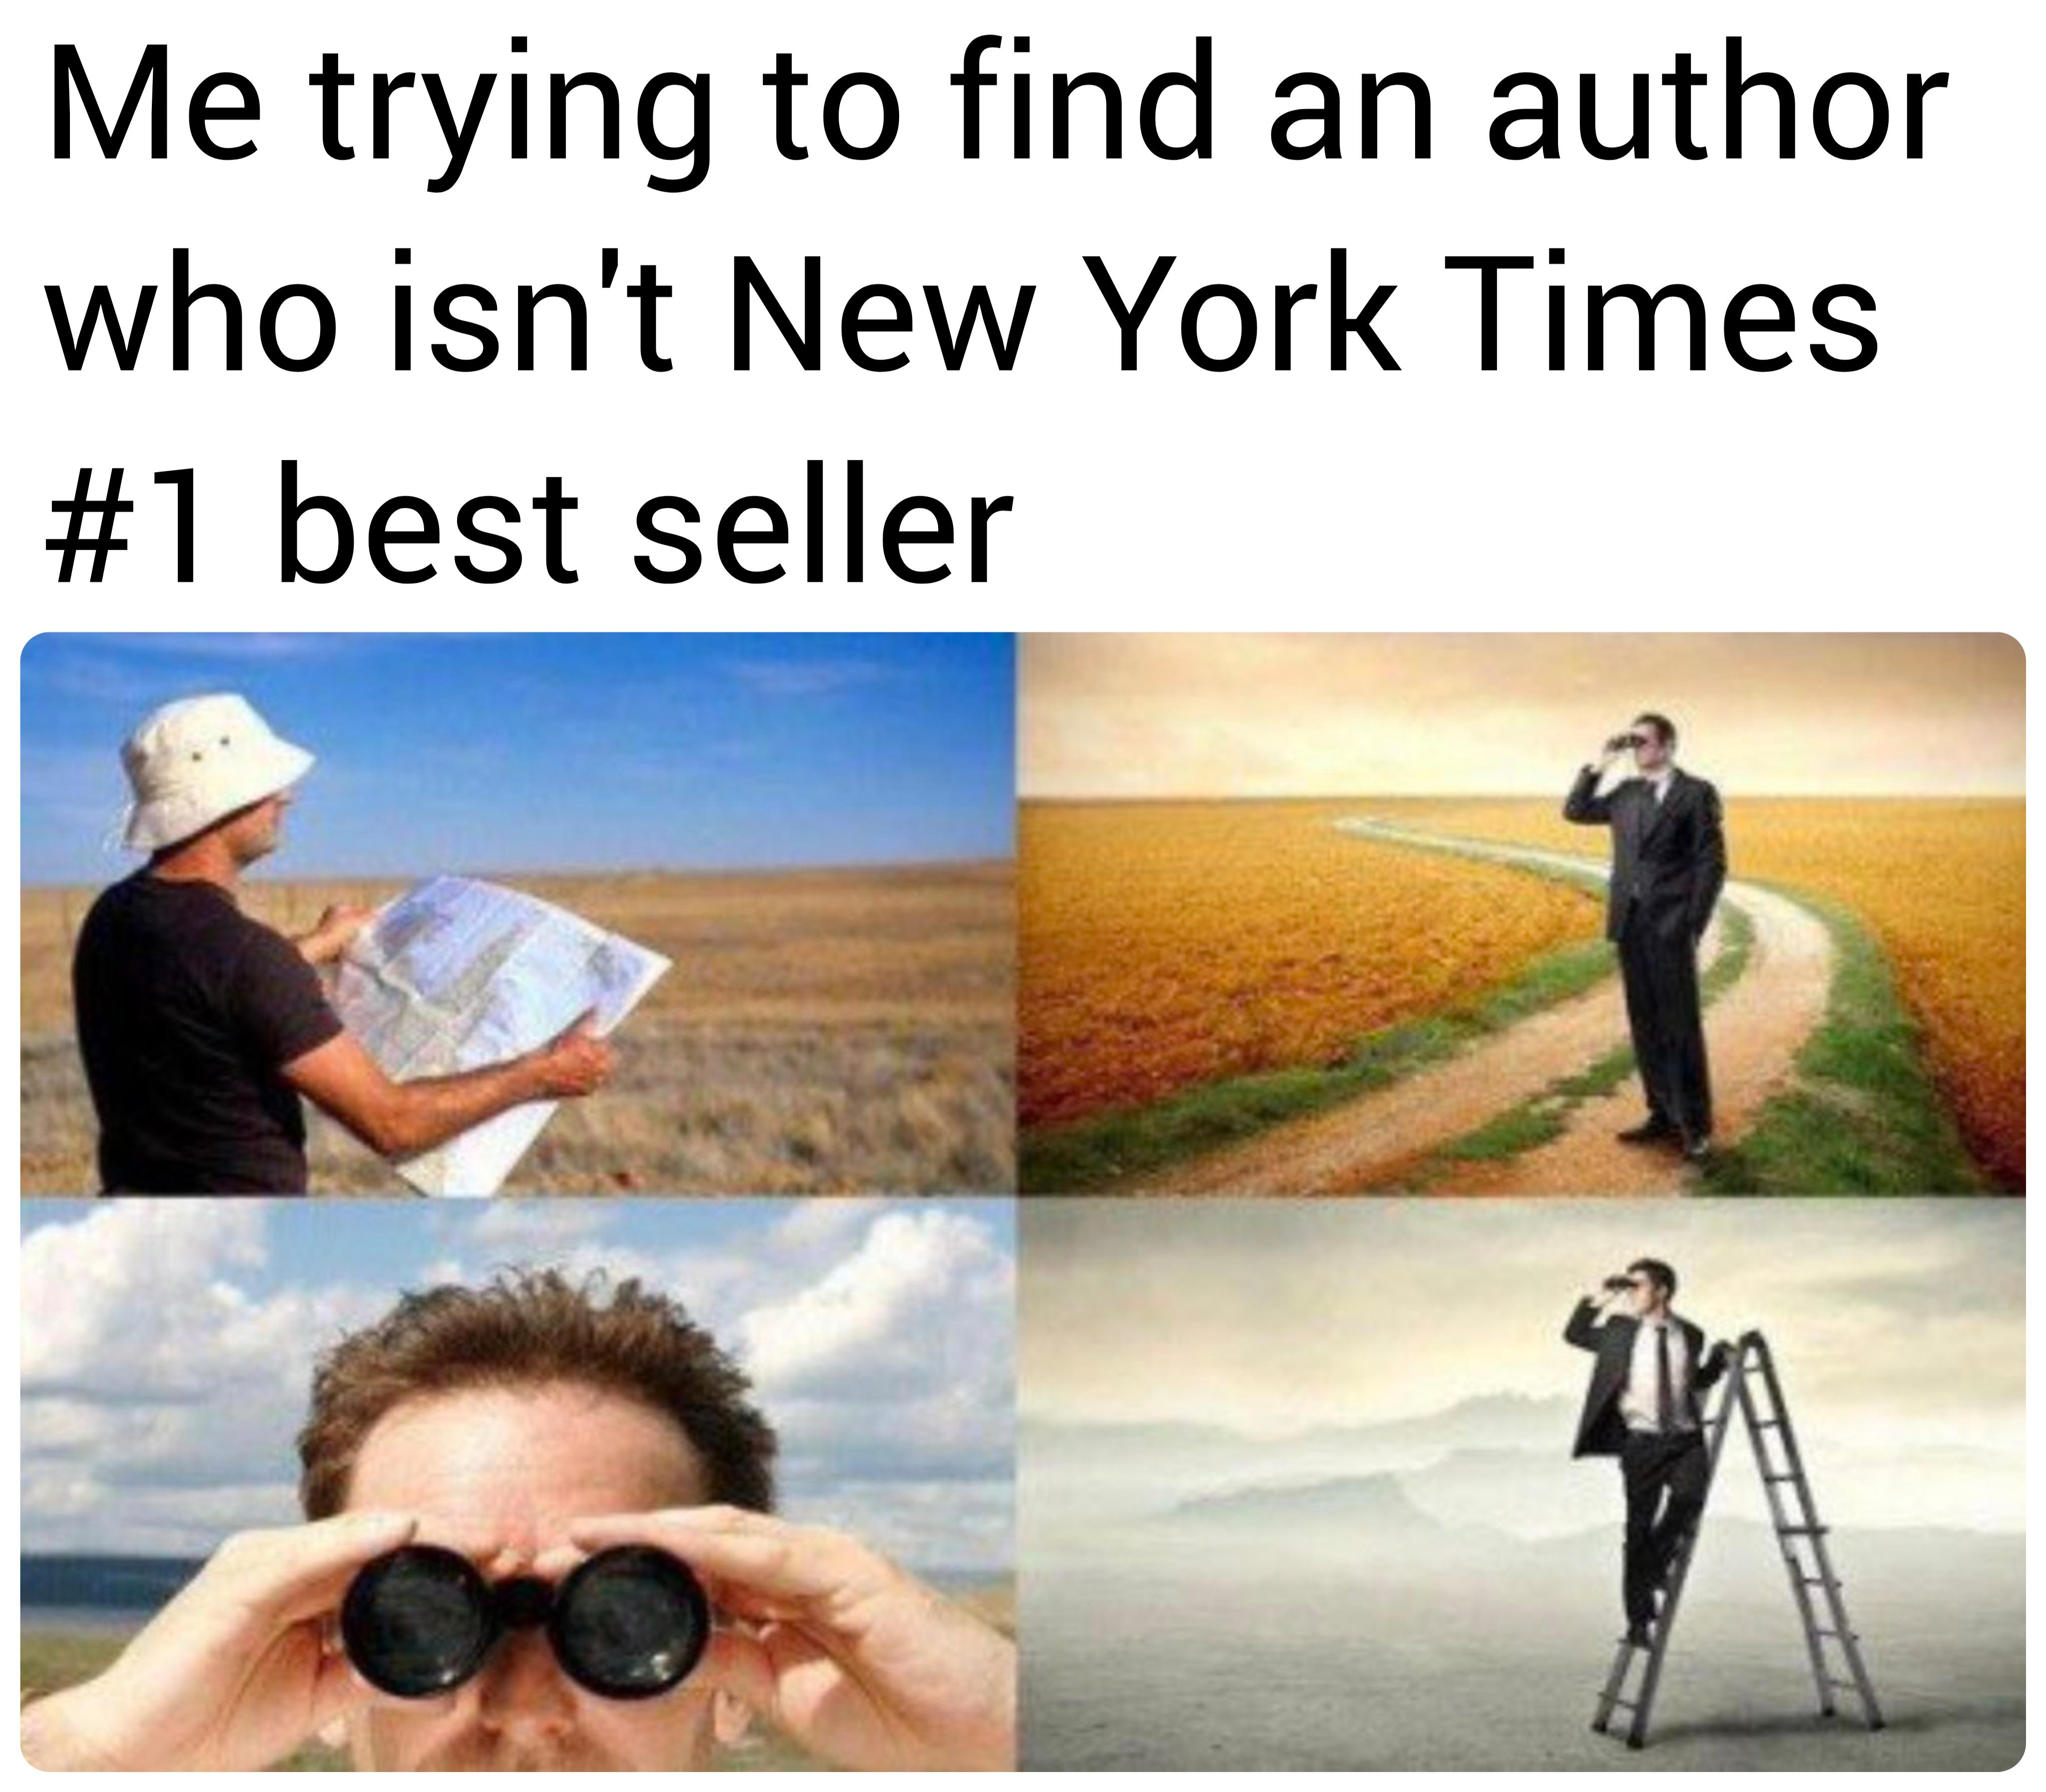 monday morning randomness - man with binoculars - Me trying to find an author who isn't New York Times best seller Sustine